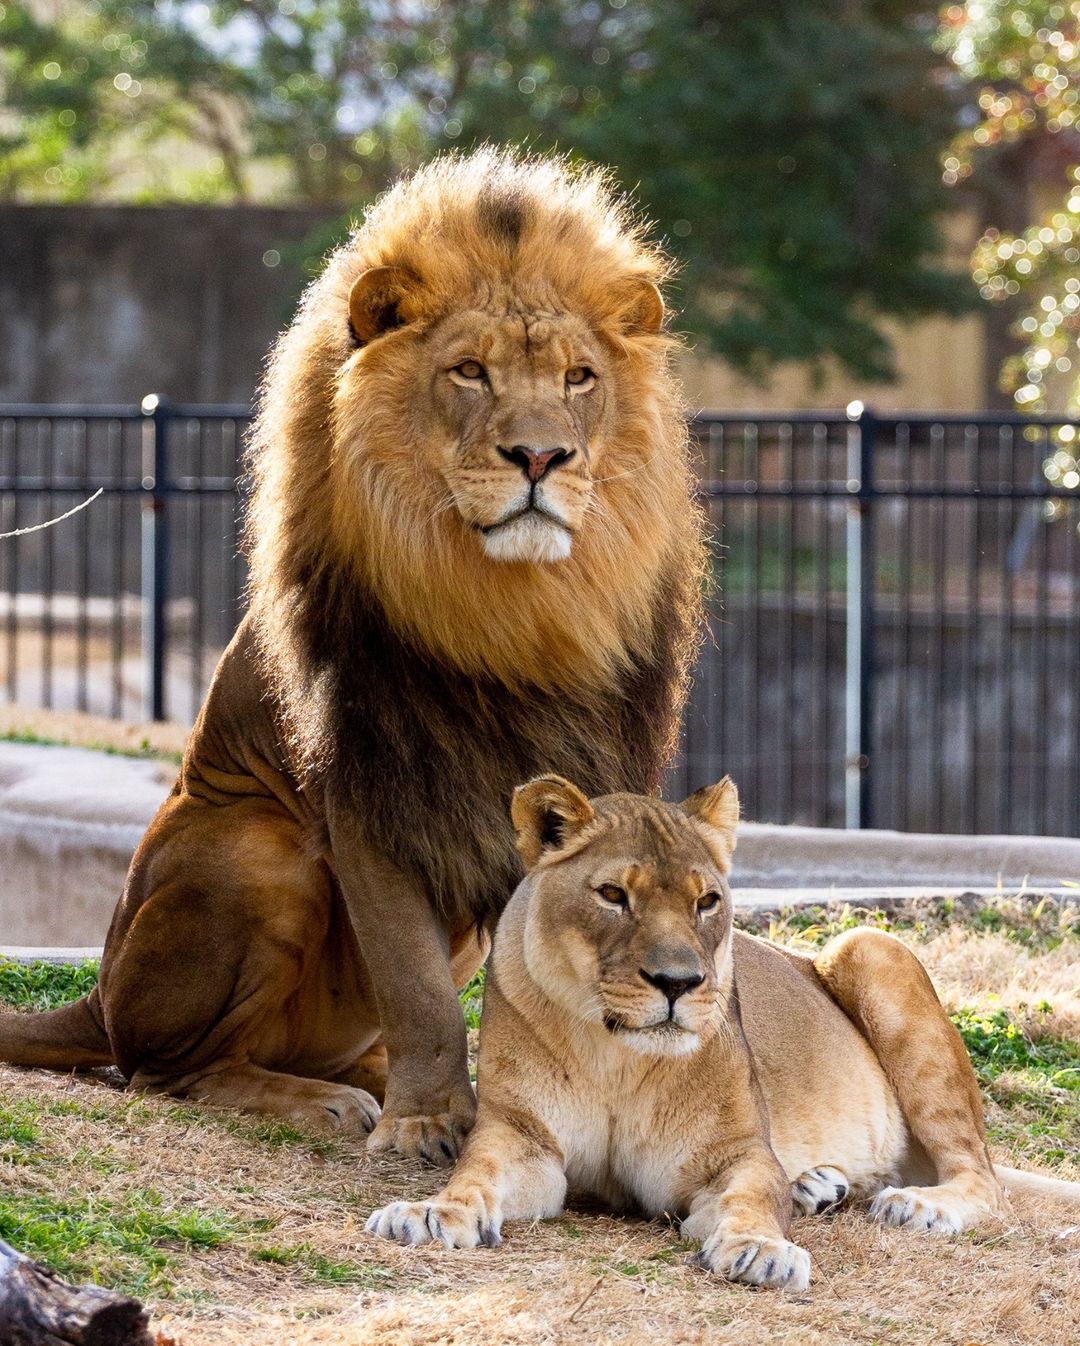 Male and Female Lion at the Tulsa Zoo. Photo by Instagram user @tulsazoo